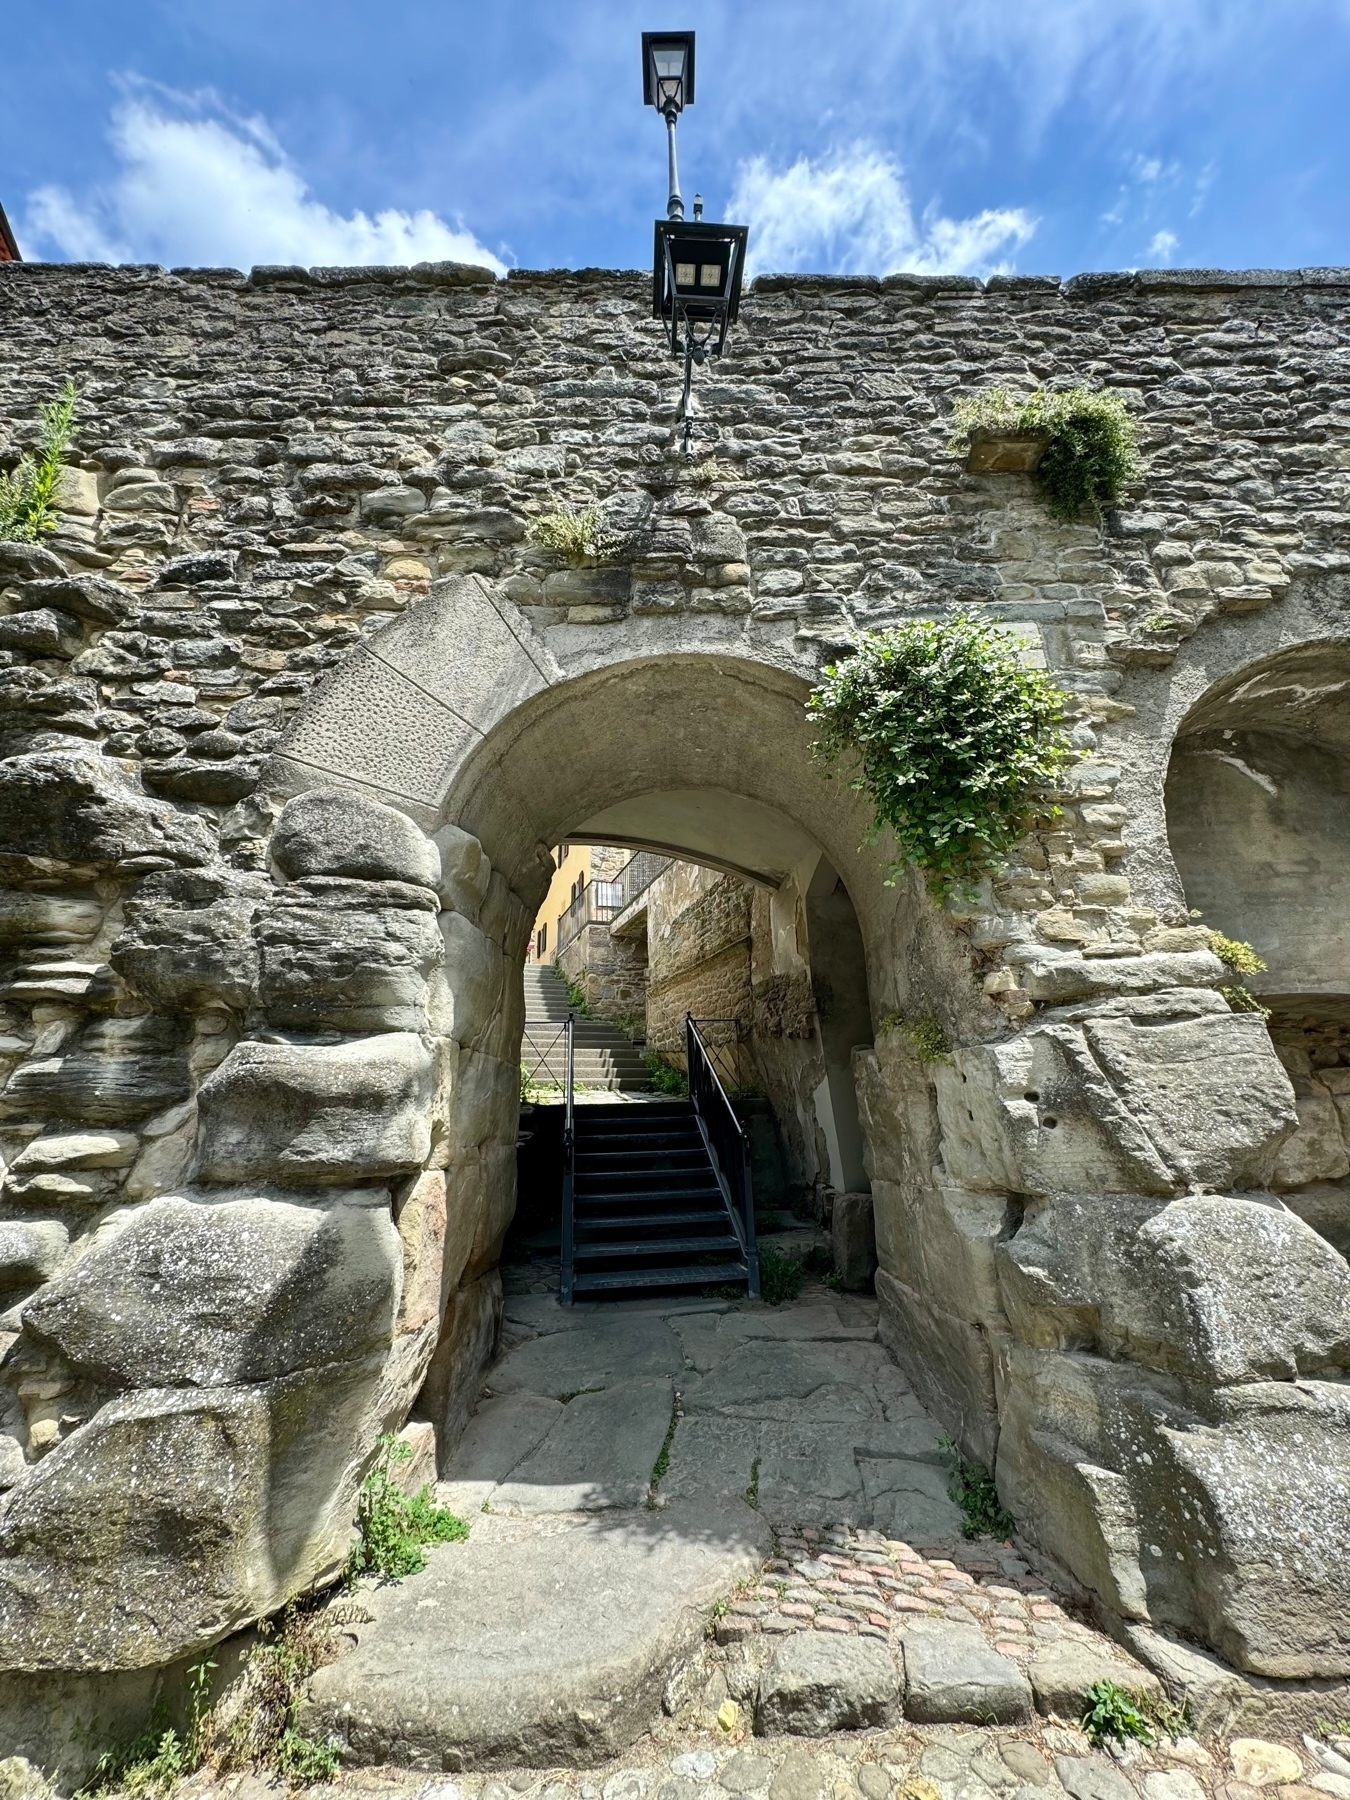 A historic stone archway with a lamp post on top. The arch leads to a staircase with metal railings, ascending towards buildings in the background. Vegetation grows through the stonework at various points, and cobblestones line the pathway under. 